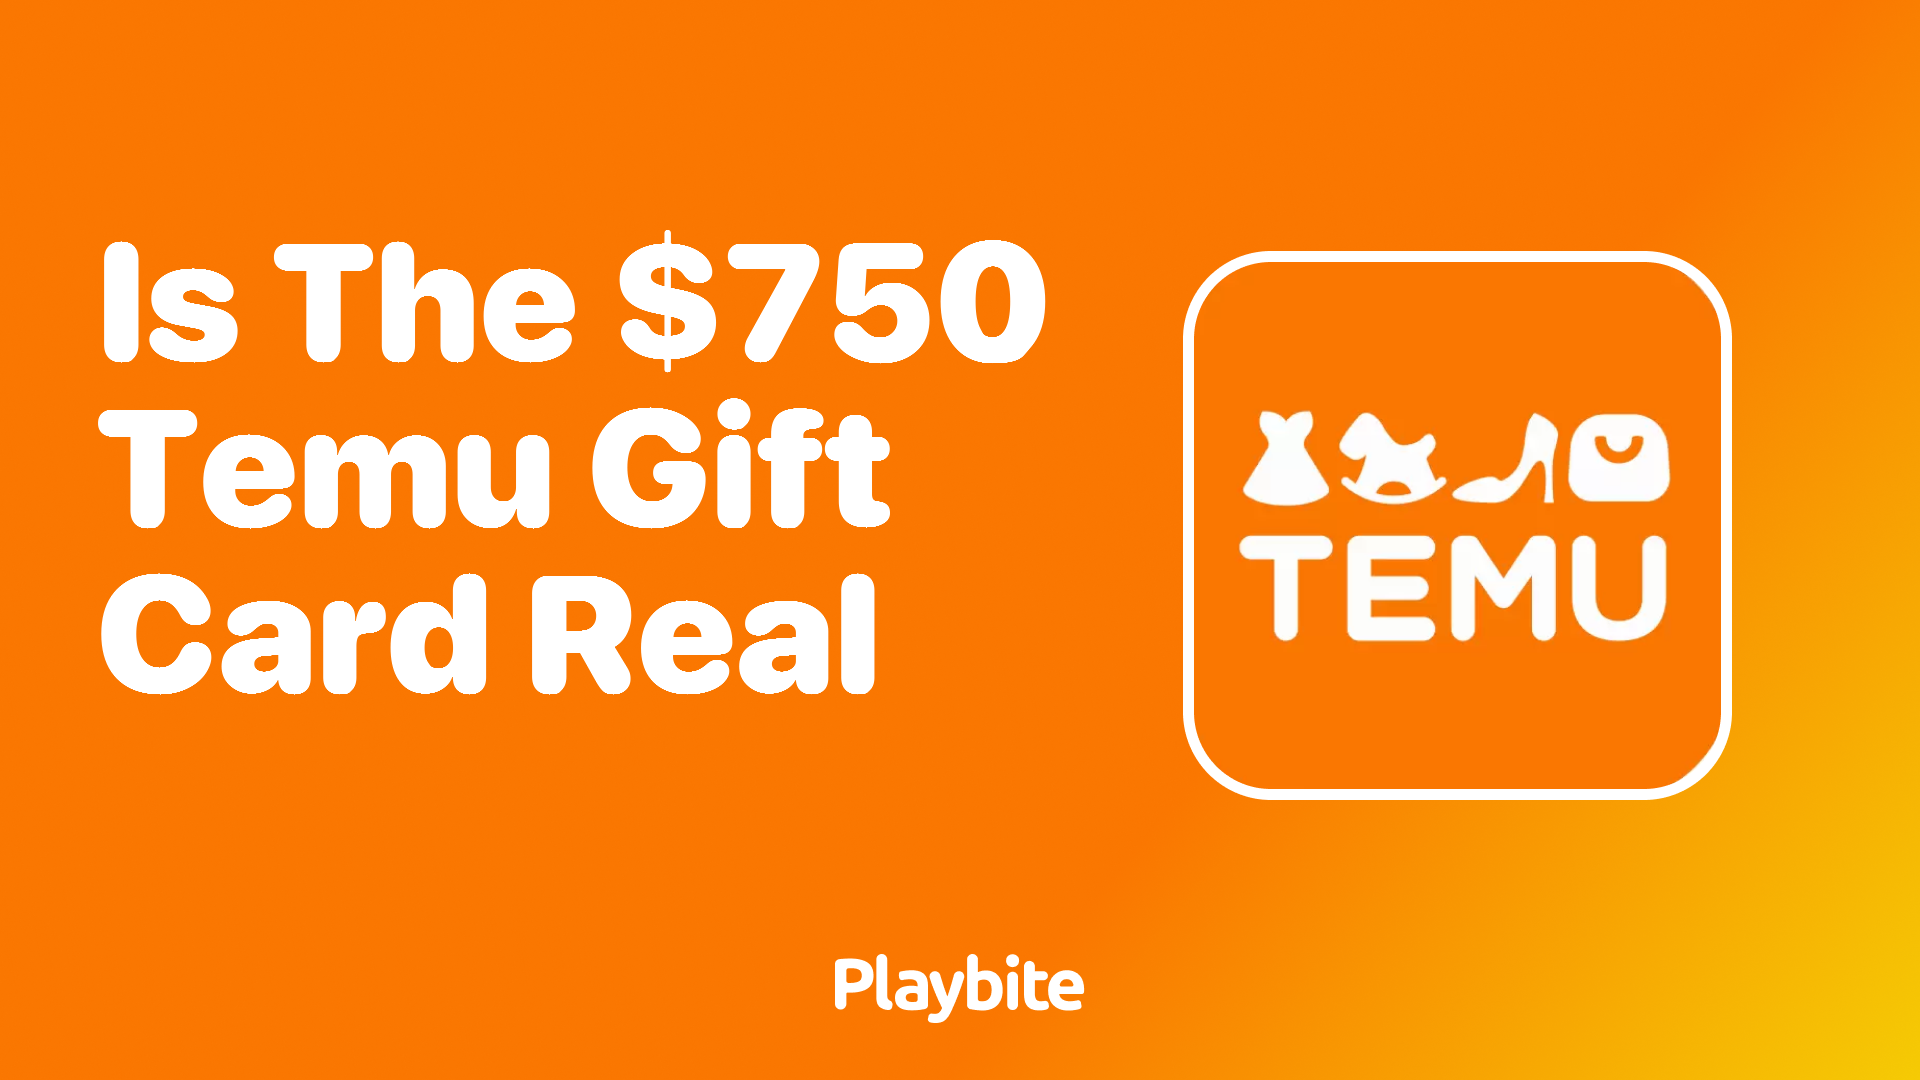 Is the $750 Temu Gift Card Real?